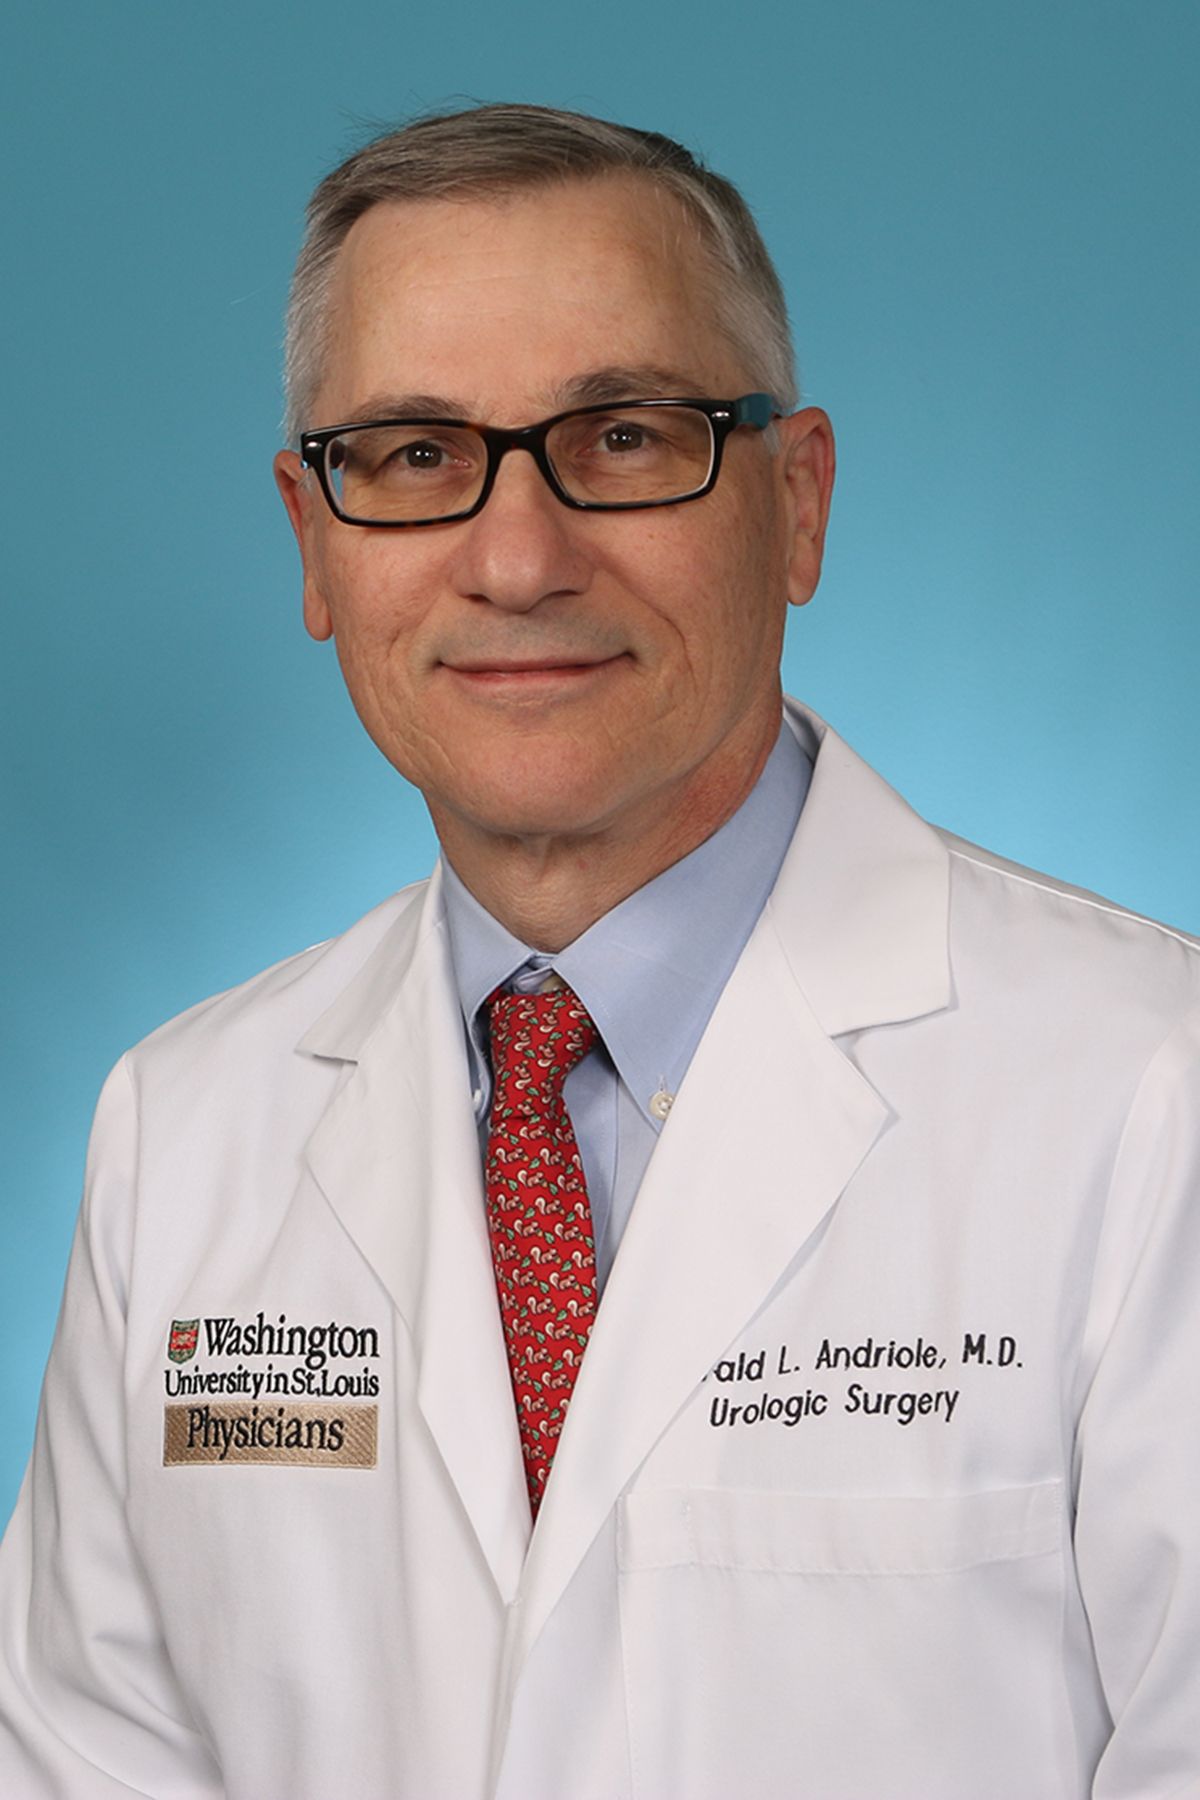 Dr. Gerald L. Andriole, the Robert K. Royce Distinguished Professor and Chief of Urologic Surgery at Washington University School of Medicine